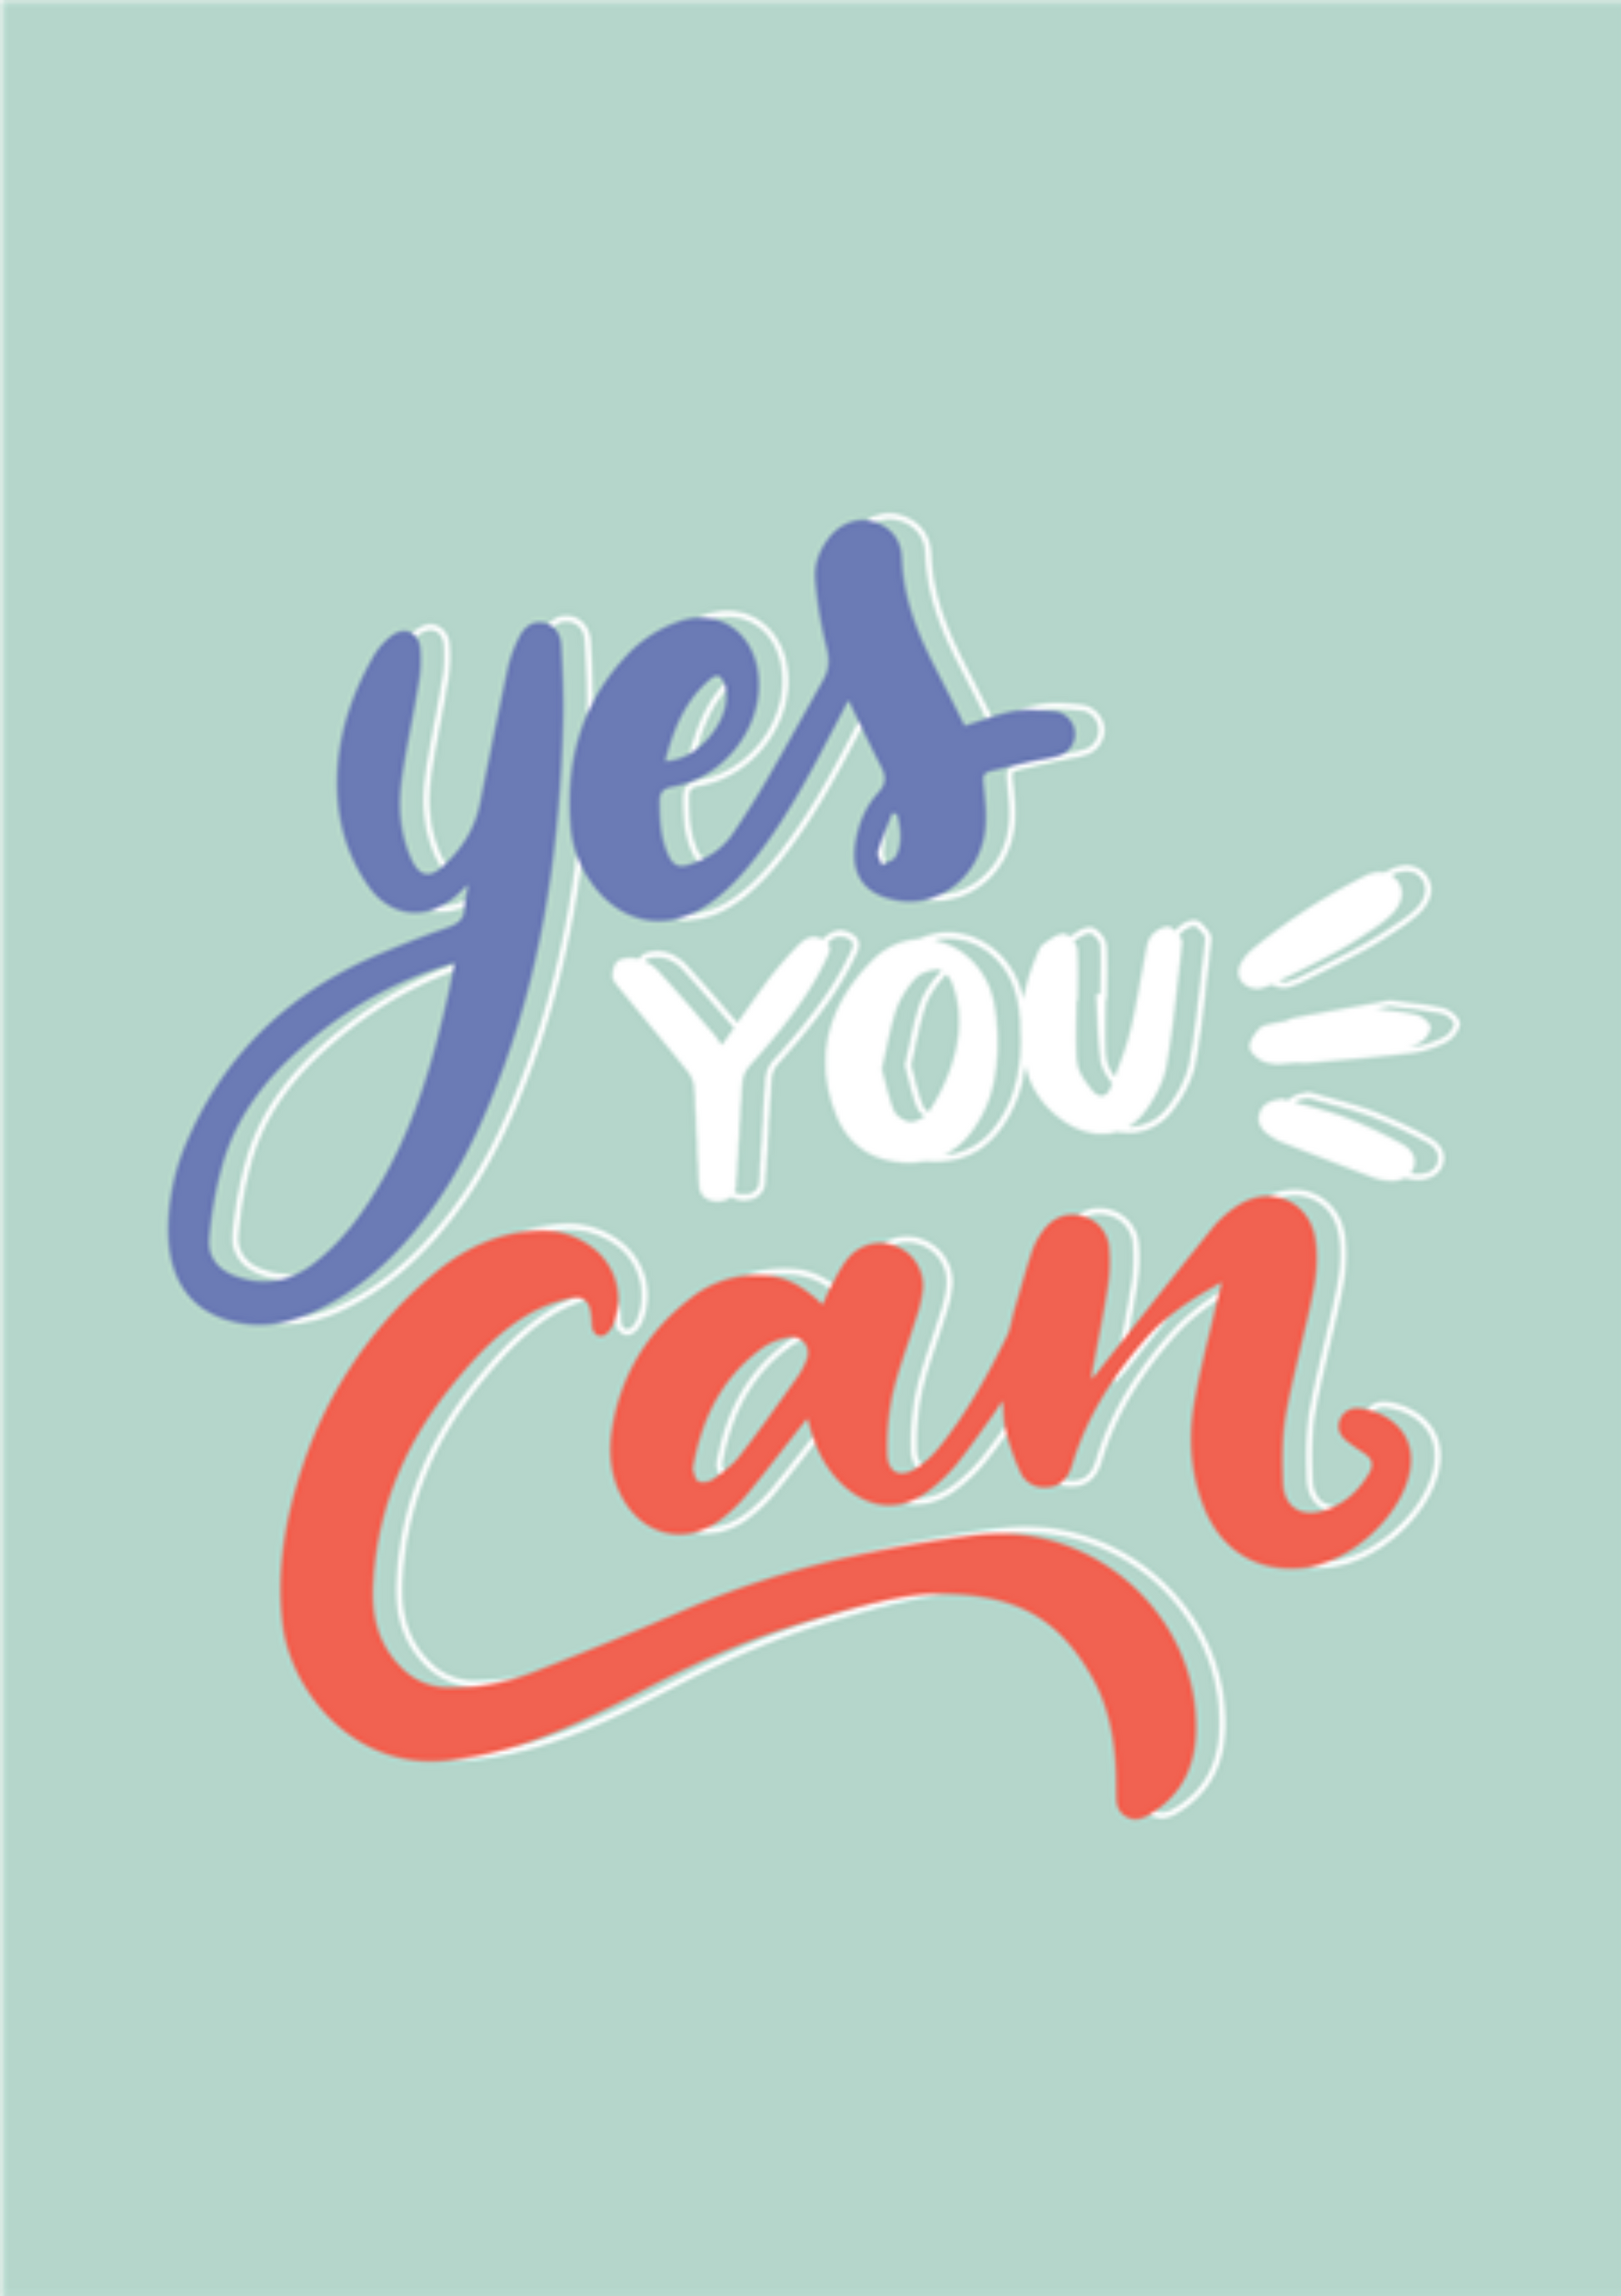 Yes You Can: Encouragement Greeting Card: Thinking Of You.